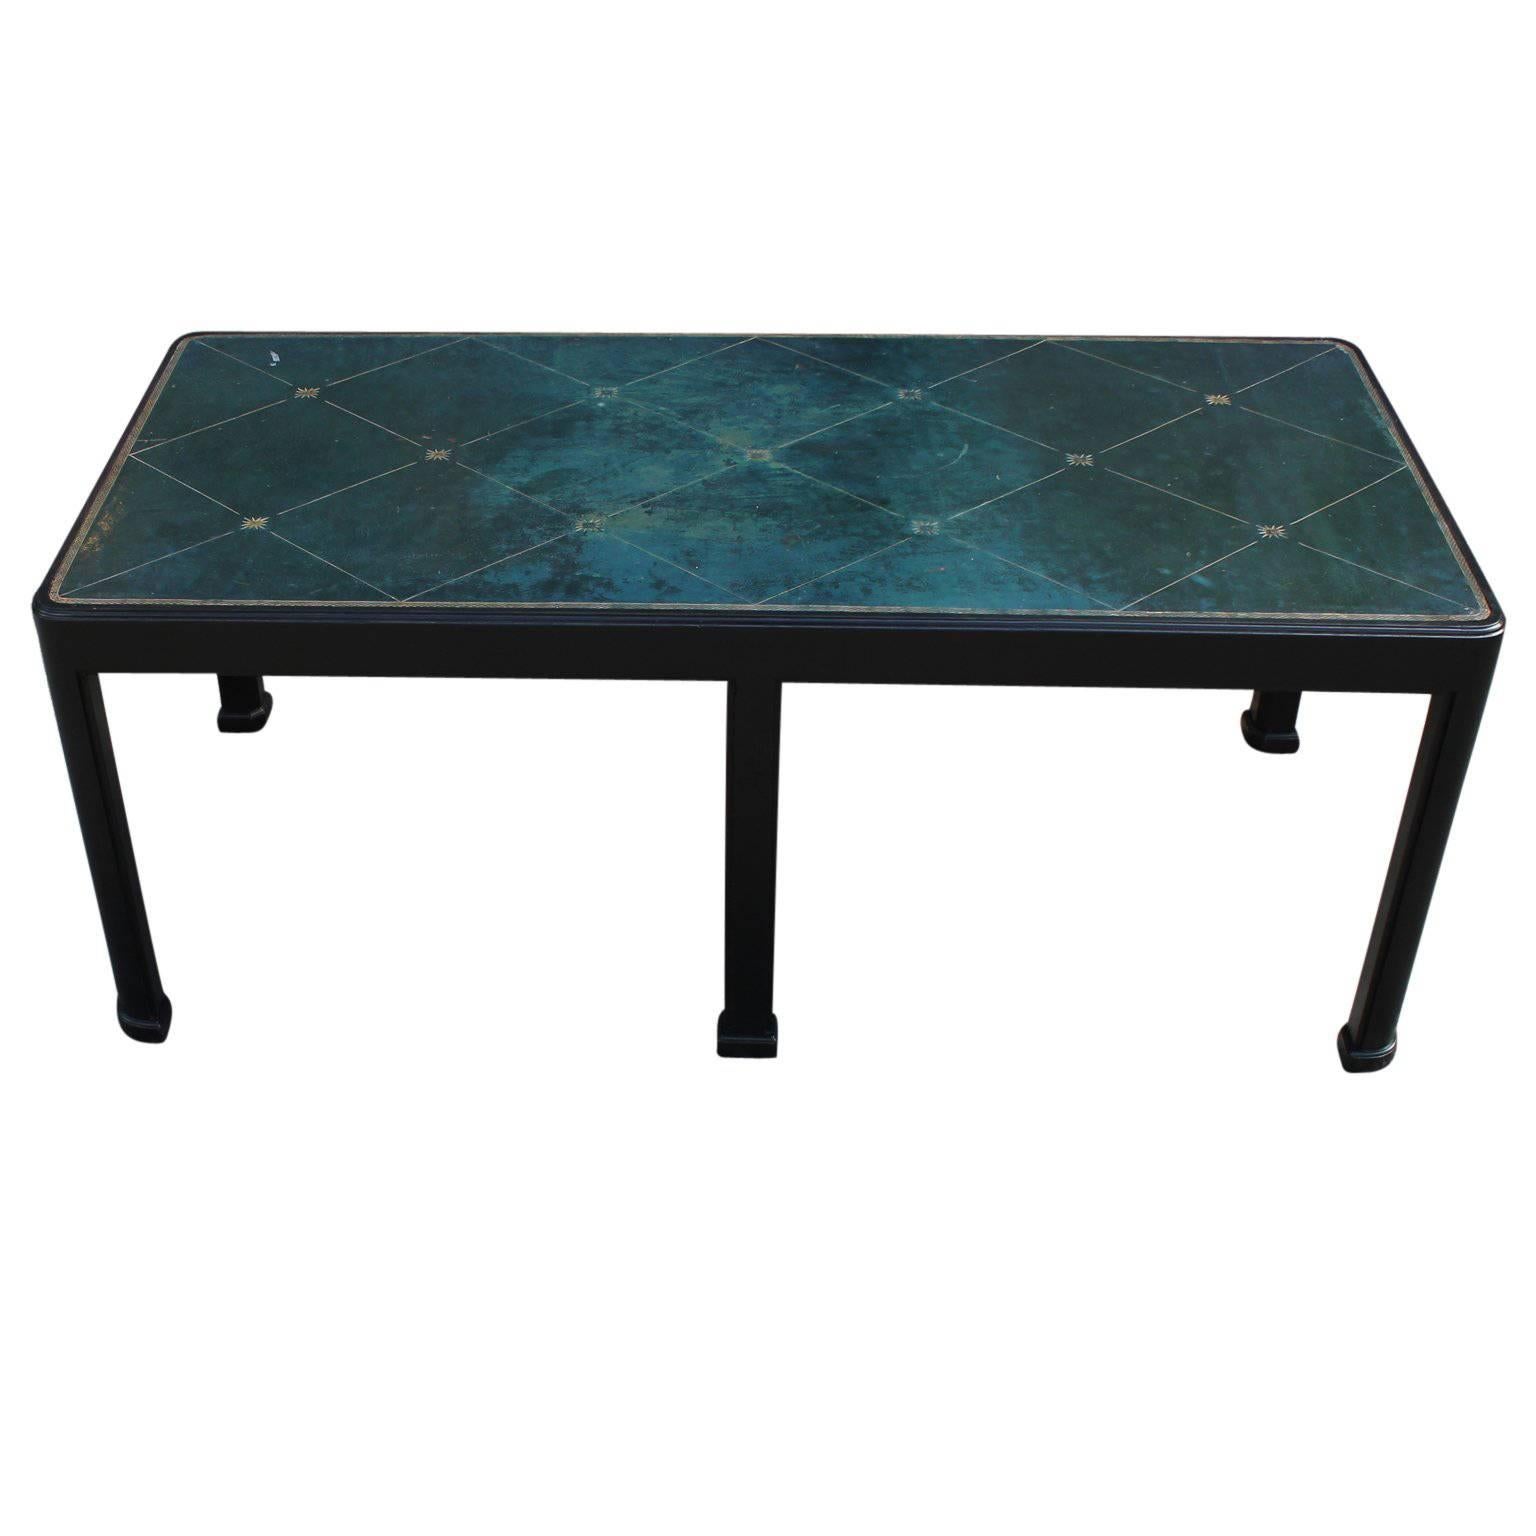 Modern Rectangular Leather Topped Tommi Parzinger Style Ebony Coffee Table 